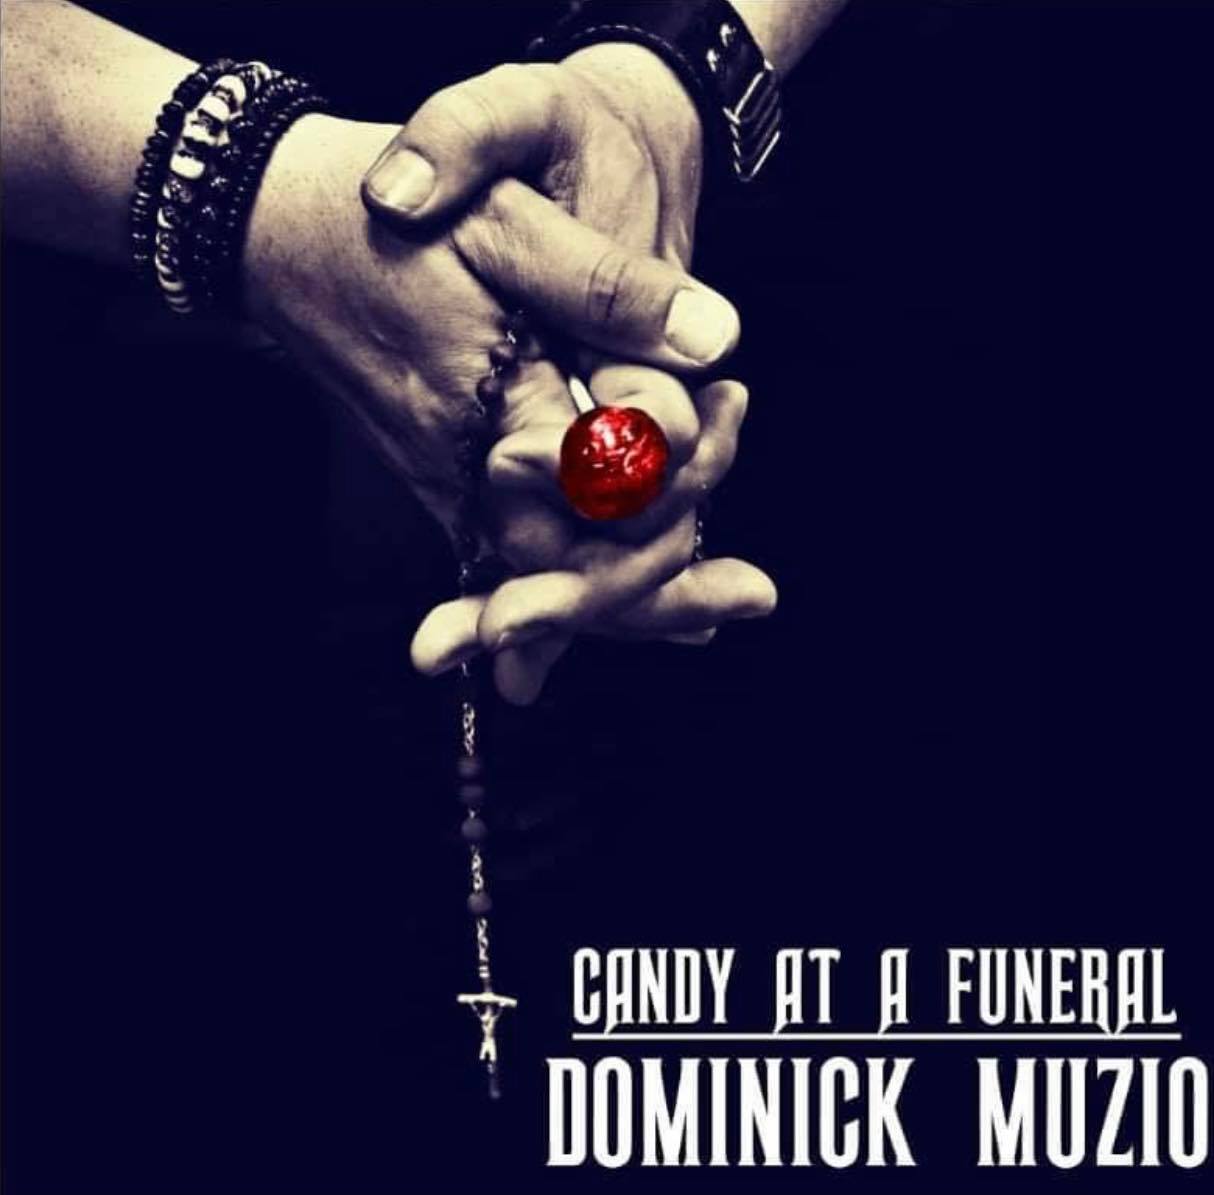 Dominick Muzio Releases First Solo Album: Candy at a Funeral